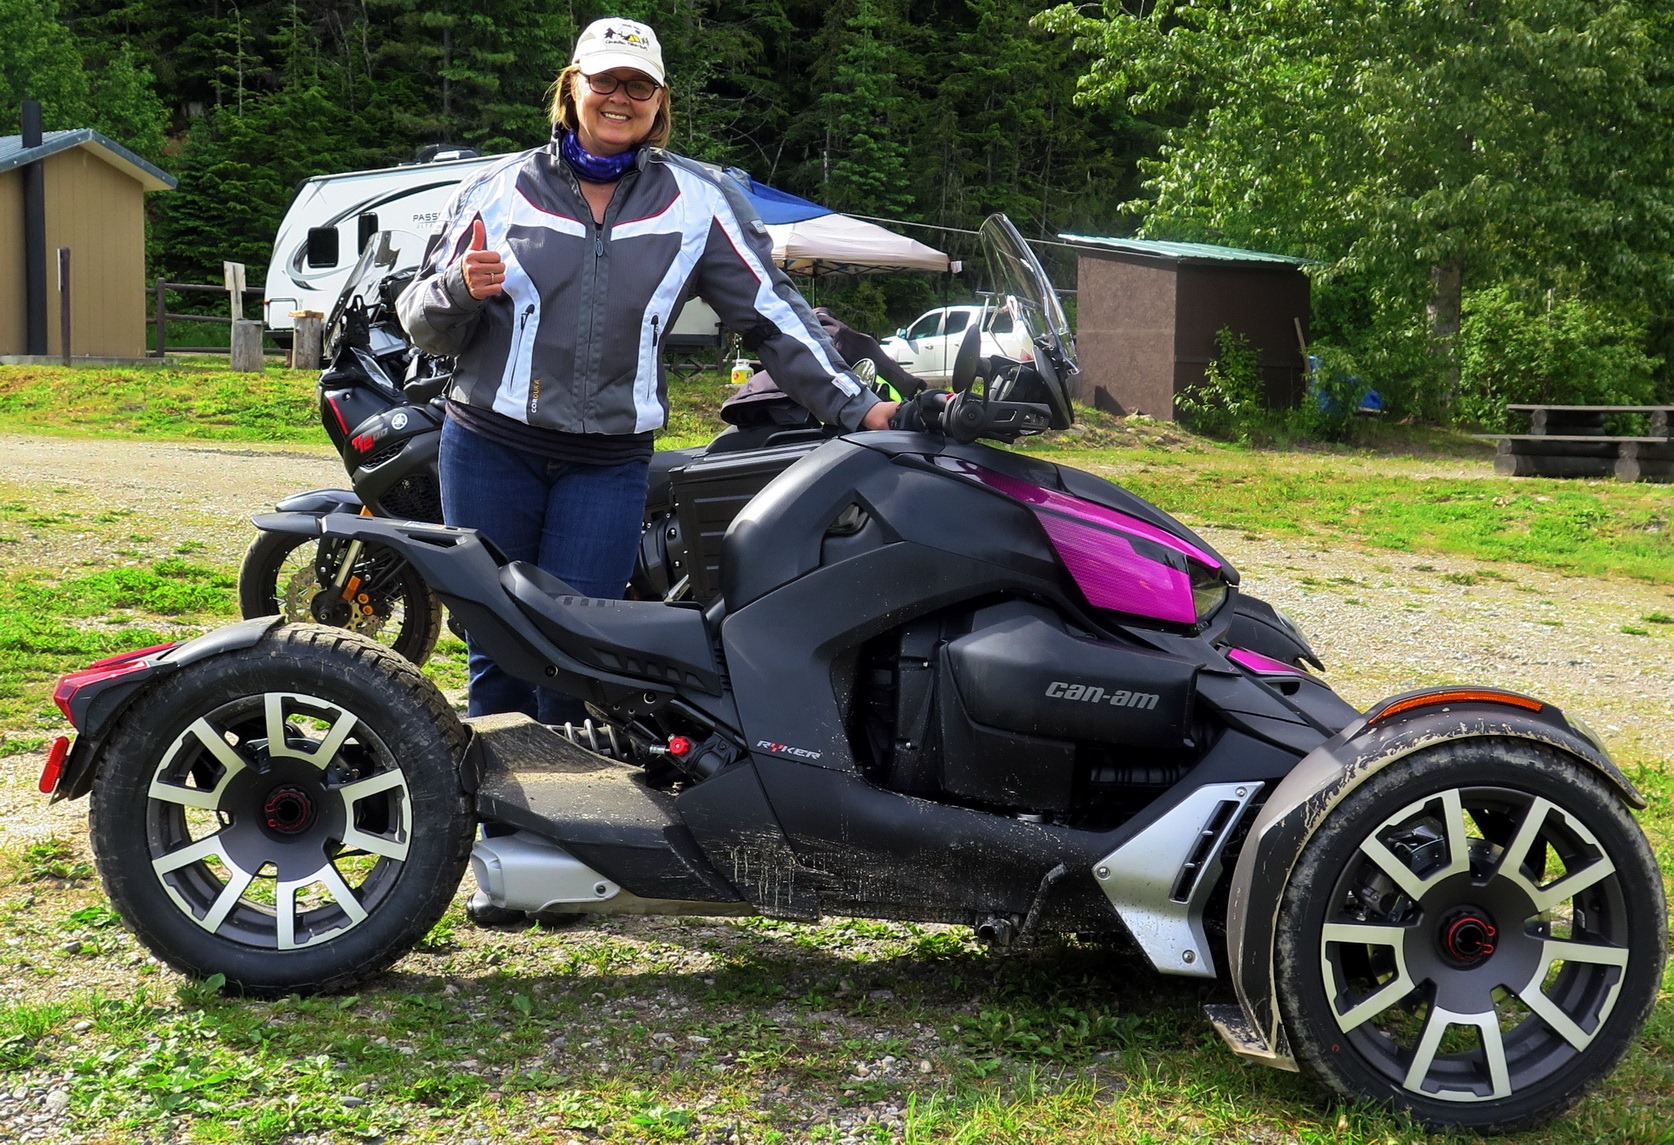 A view of the amazing work that Can Am has done for the surrounding area of North America, especially pertaining to rider, rallies, charity work and encouragement of riding for women